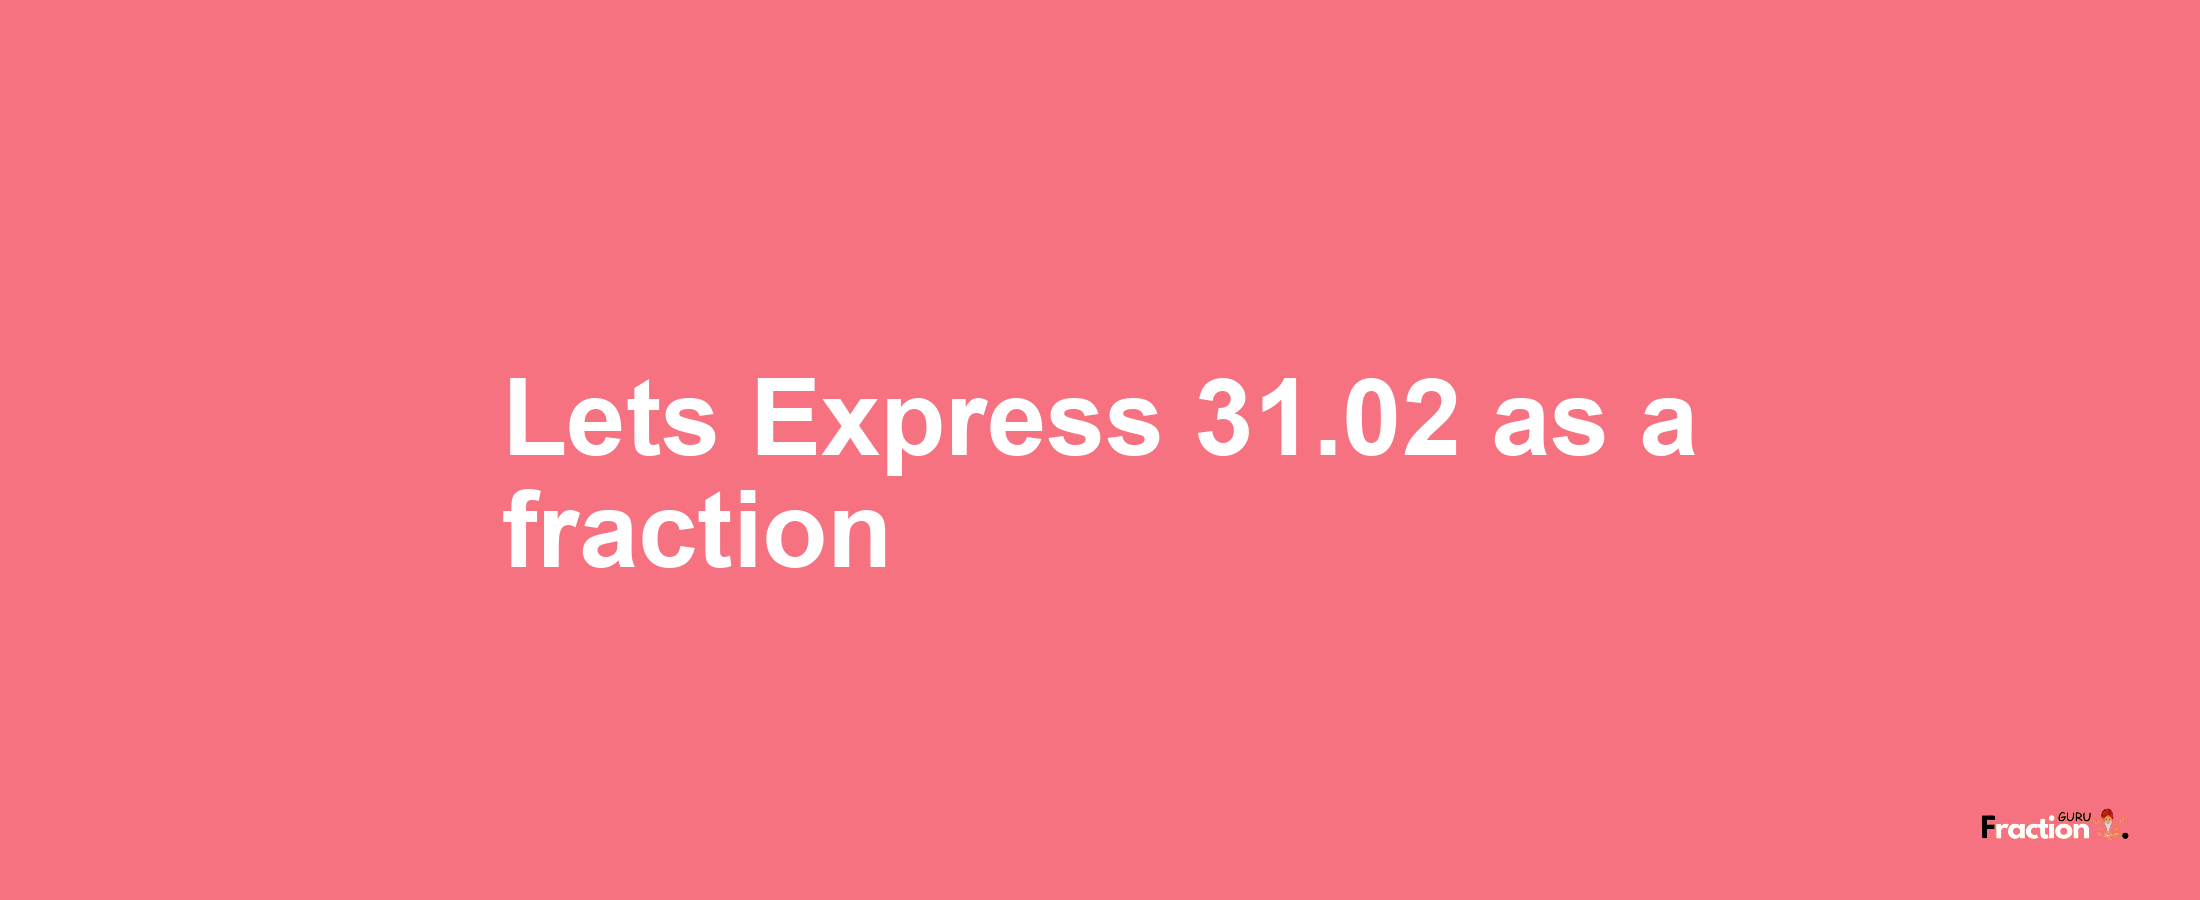 Lets Express 31.02 as afraction